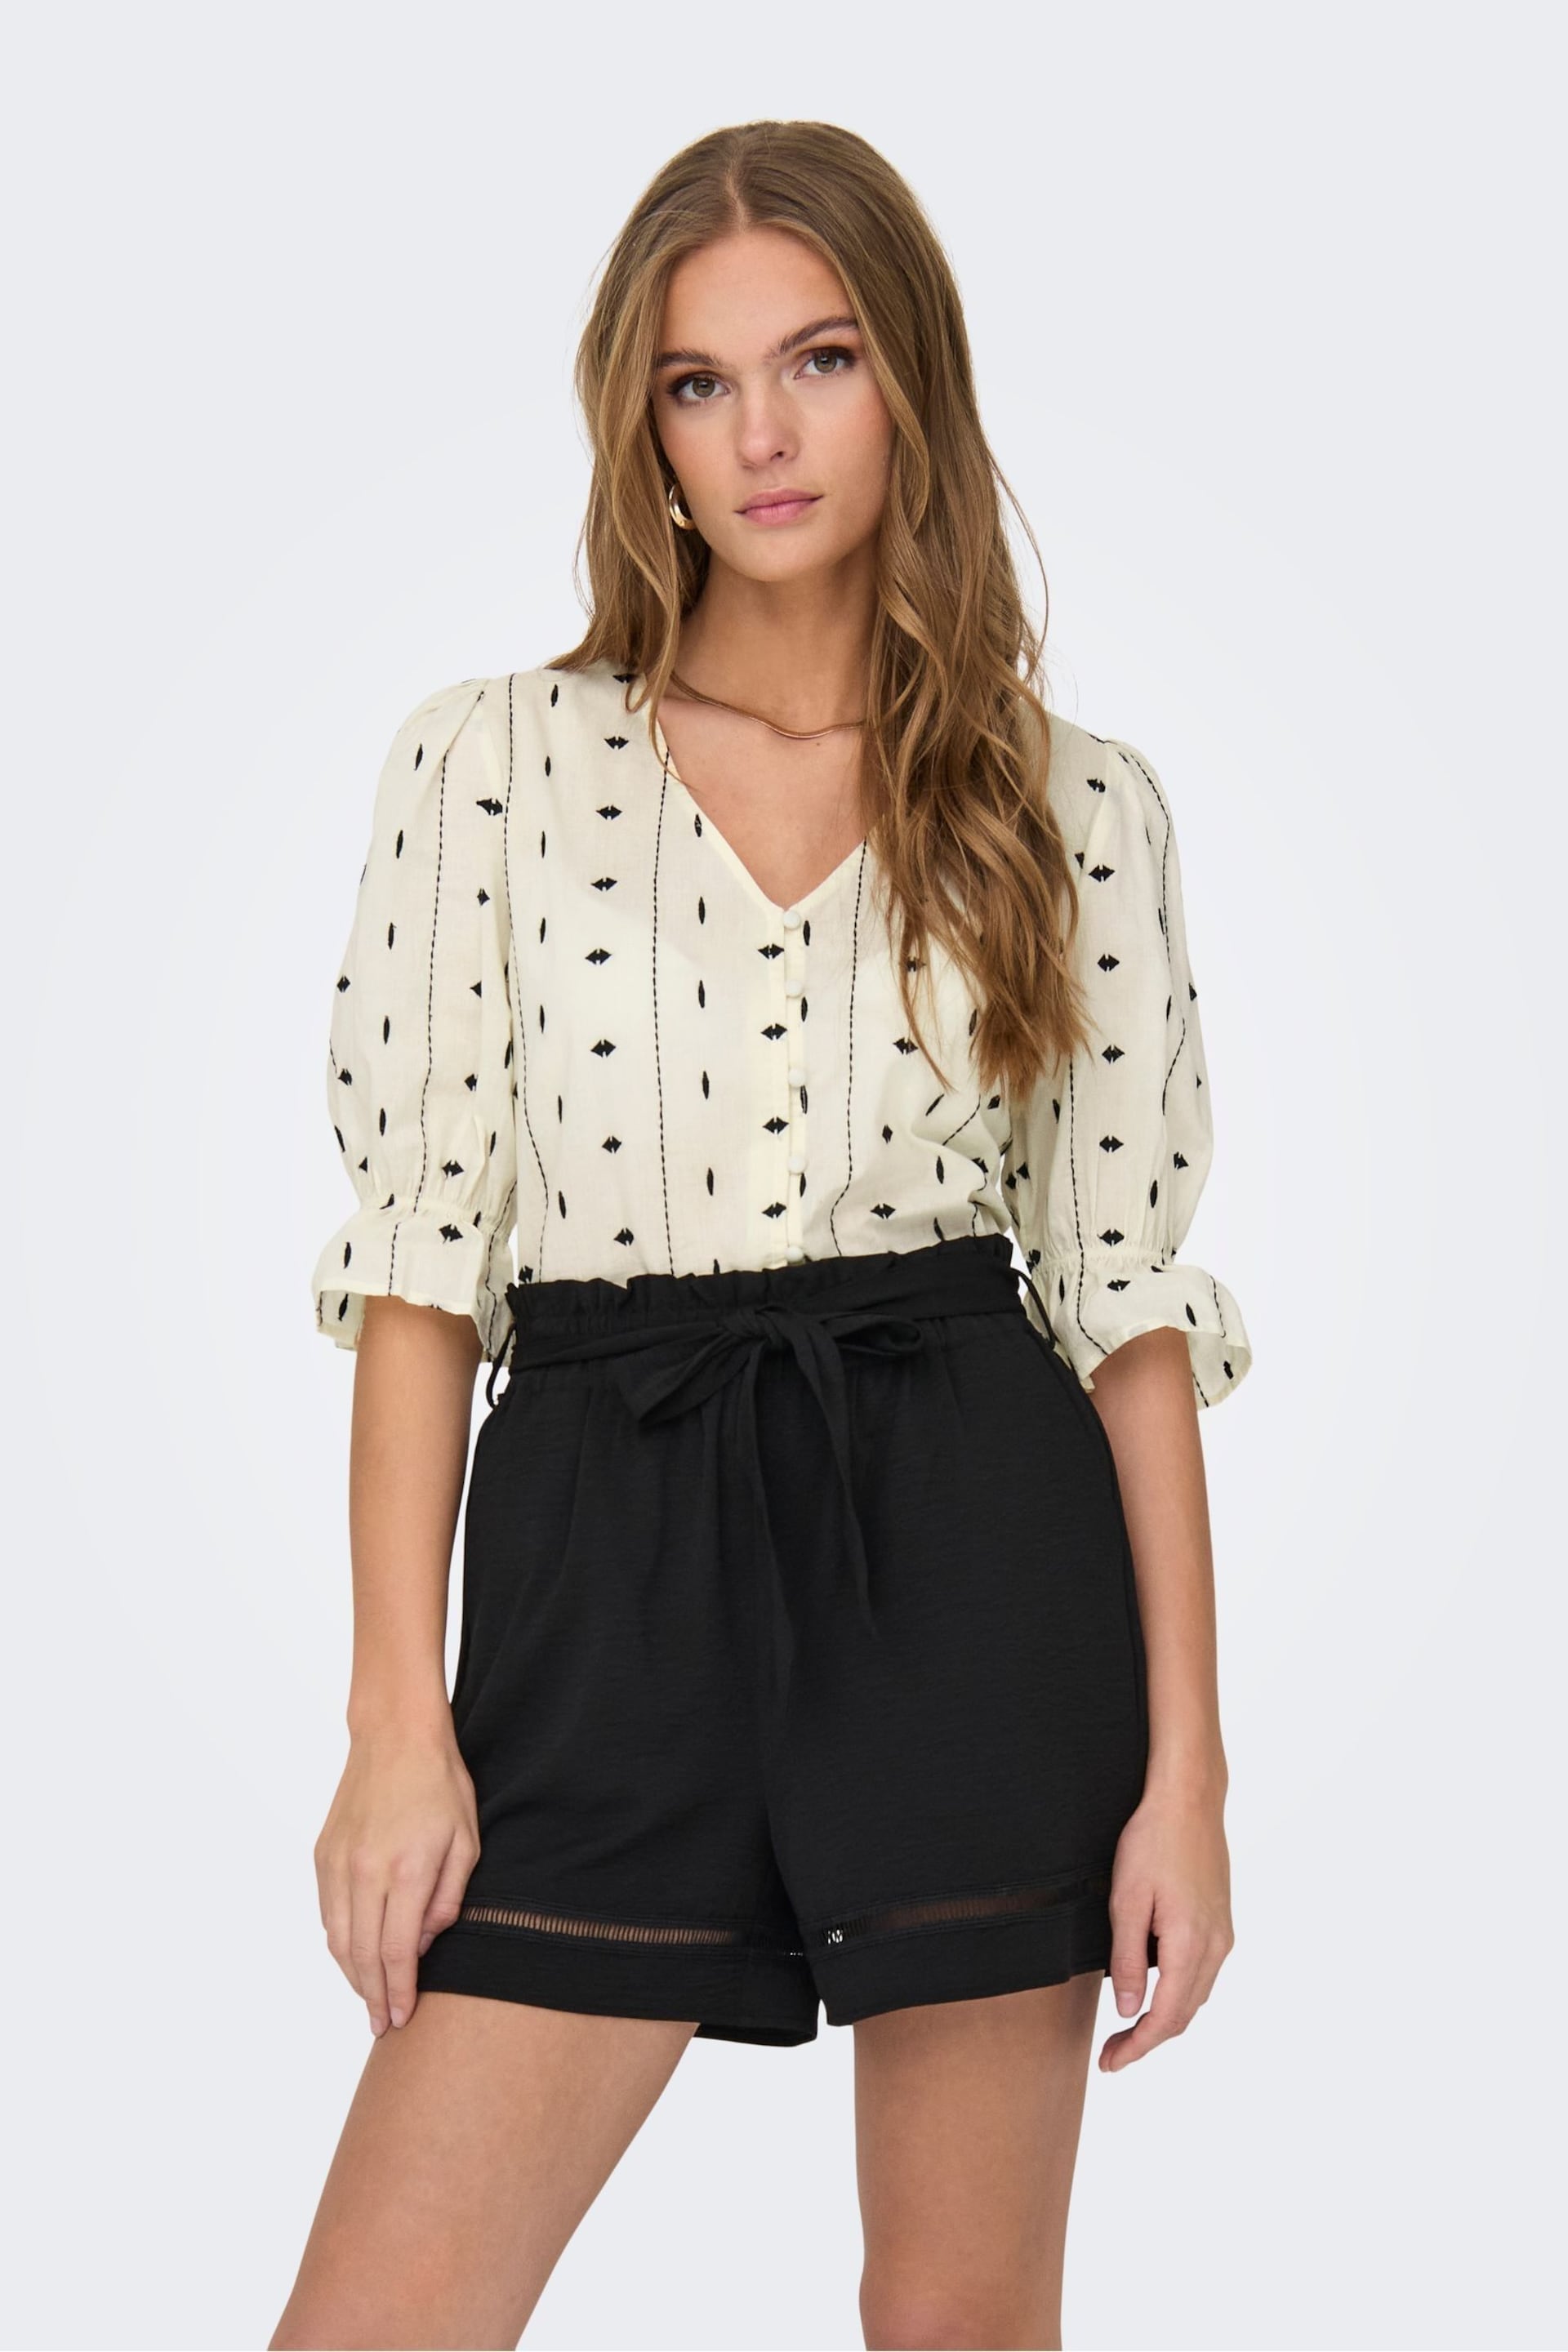 ONLY Cream Embroidered Short Sleeve Button Up Blouse - Image 3 of 8